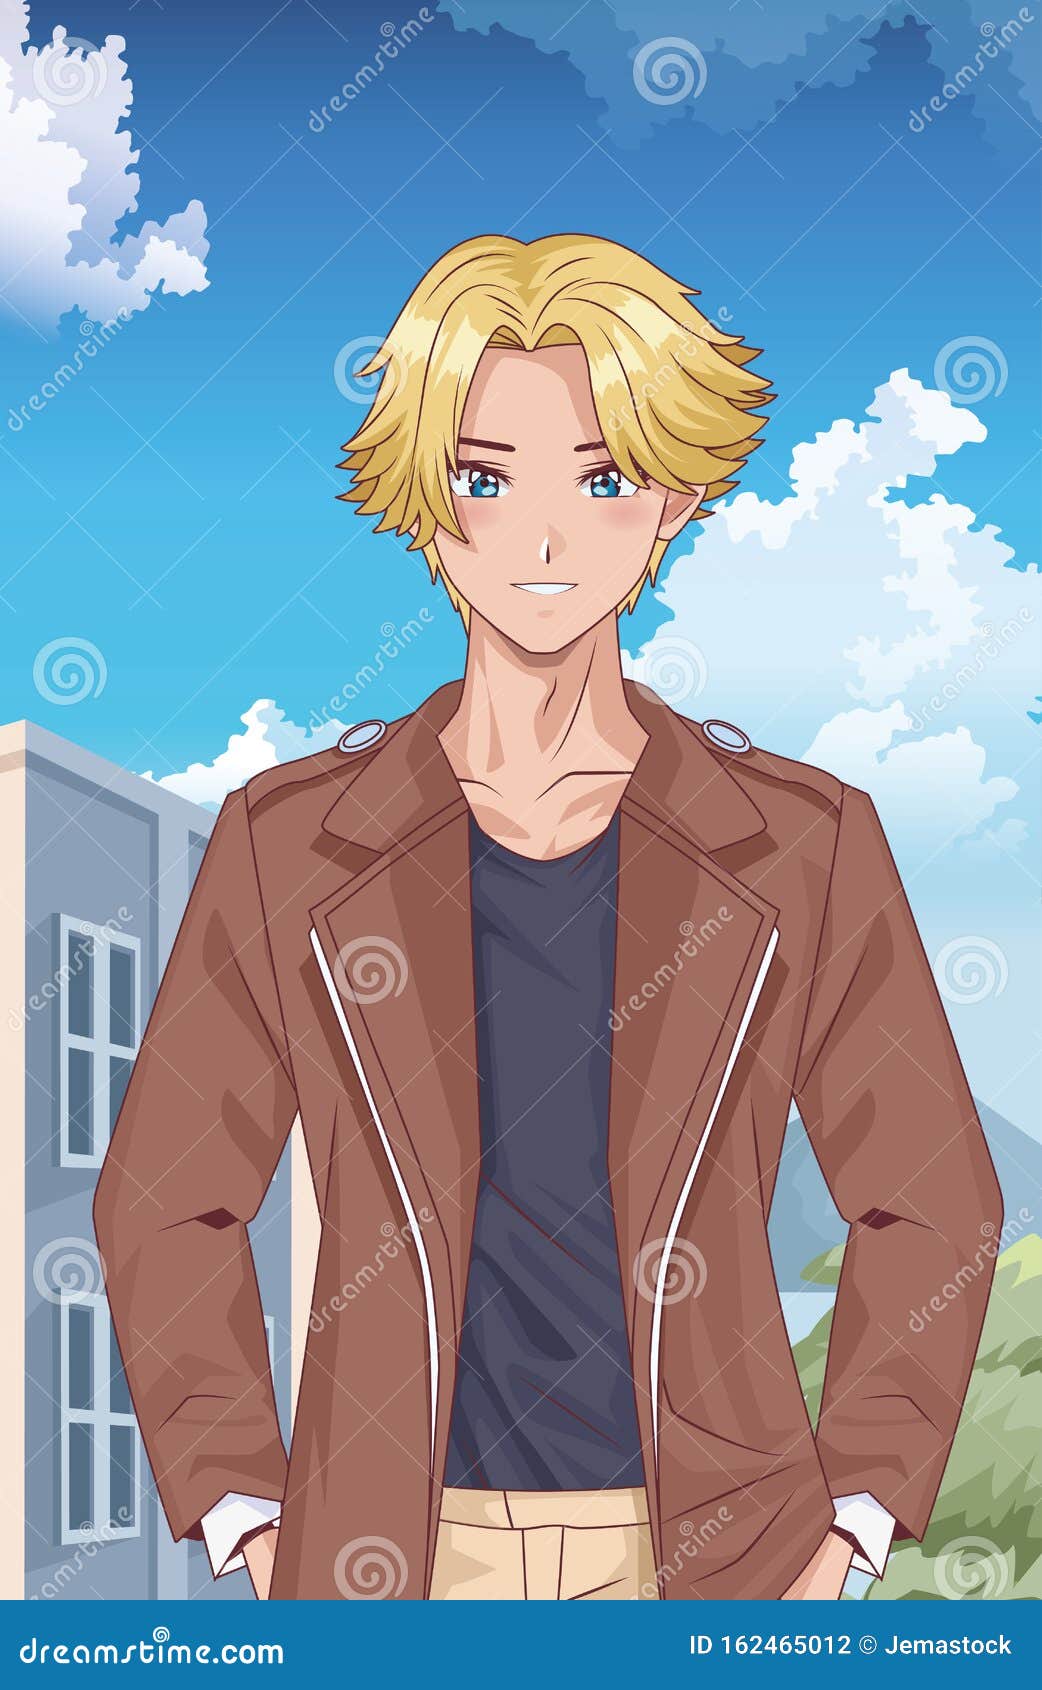 Top 10 Blond Male Anime Characters – Mel's Universe